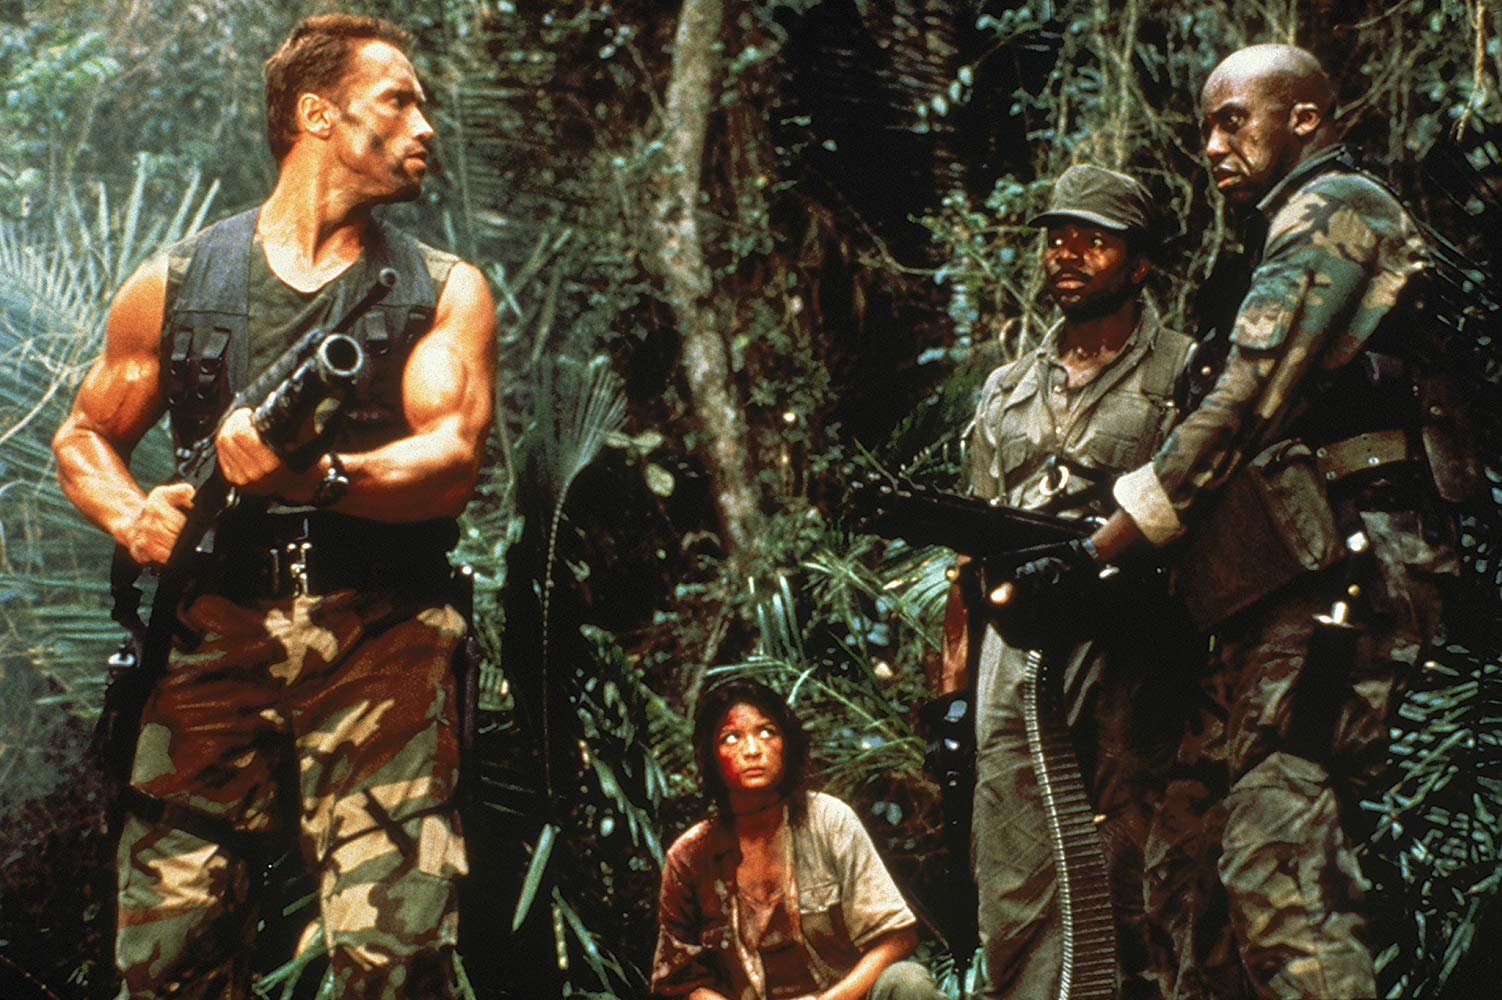 Predator cinematographer Donald McAlpine: “Arnie would feed me a great meal, then his side of the argument!”